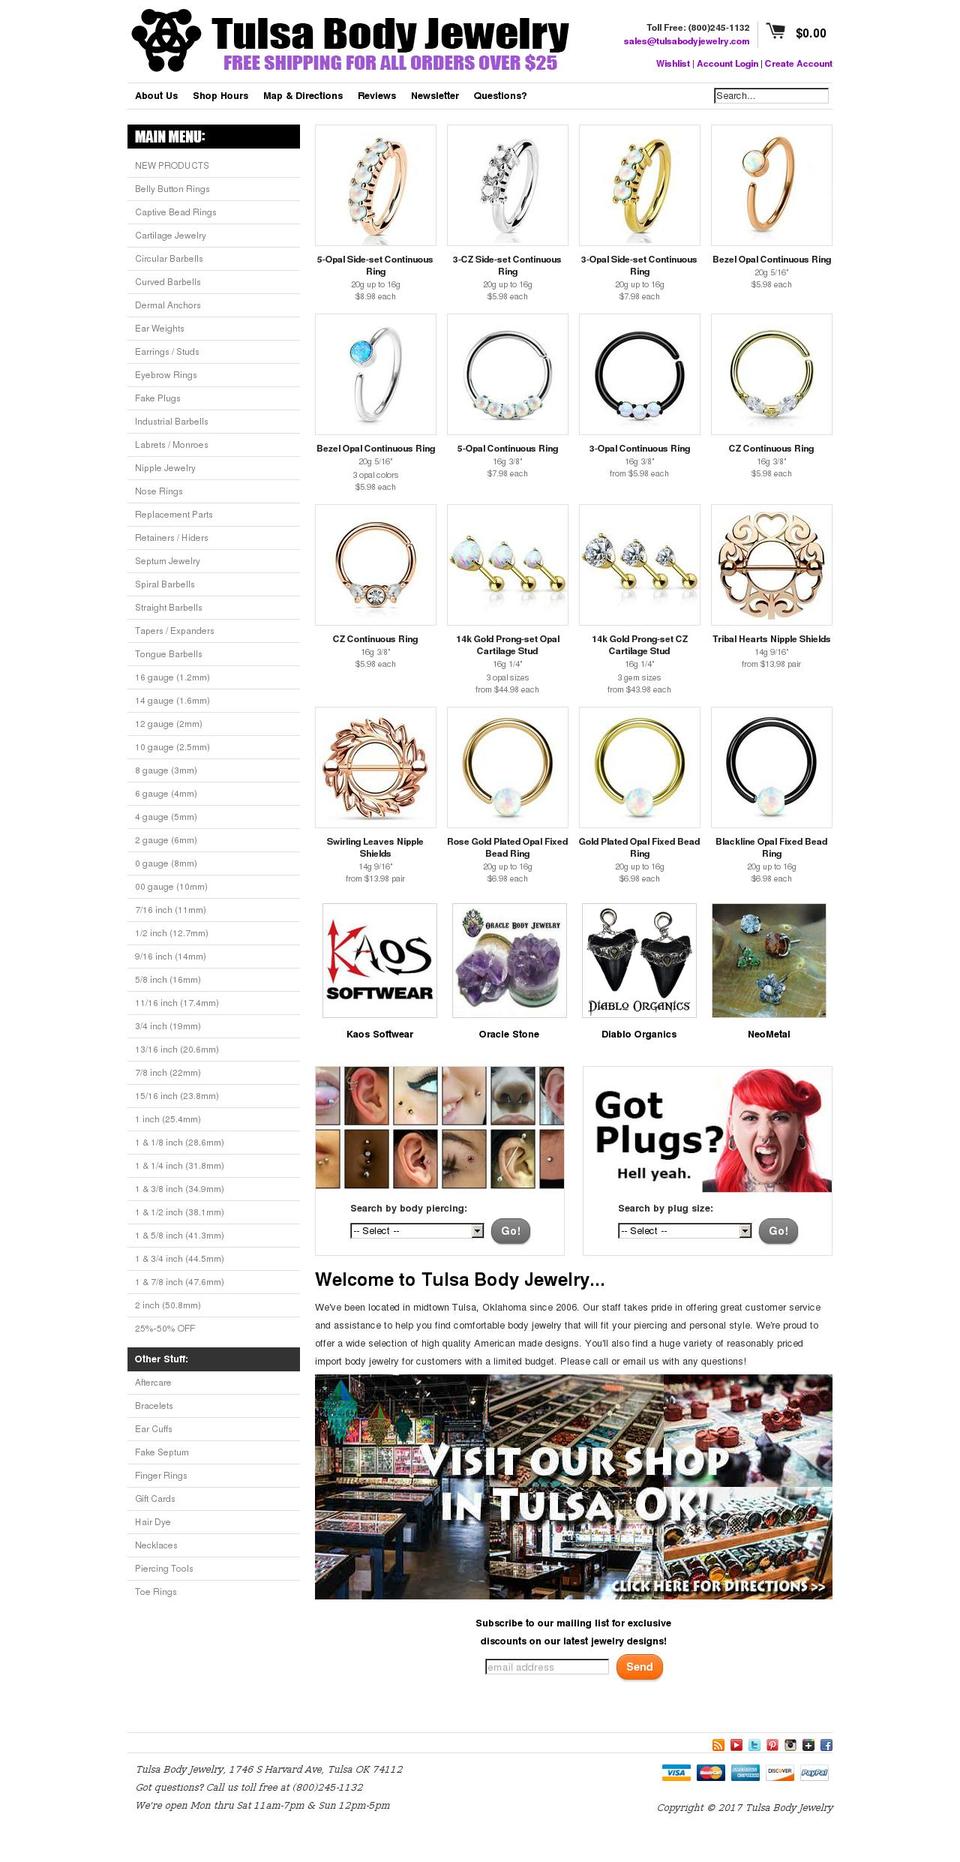 ShowTime Shopify theme site example tulsabodyjewelry.com